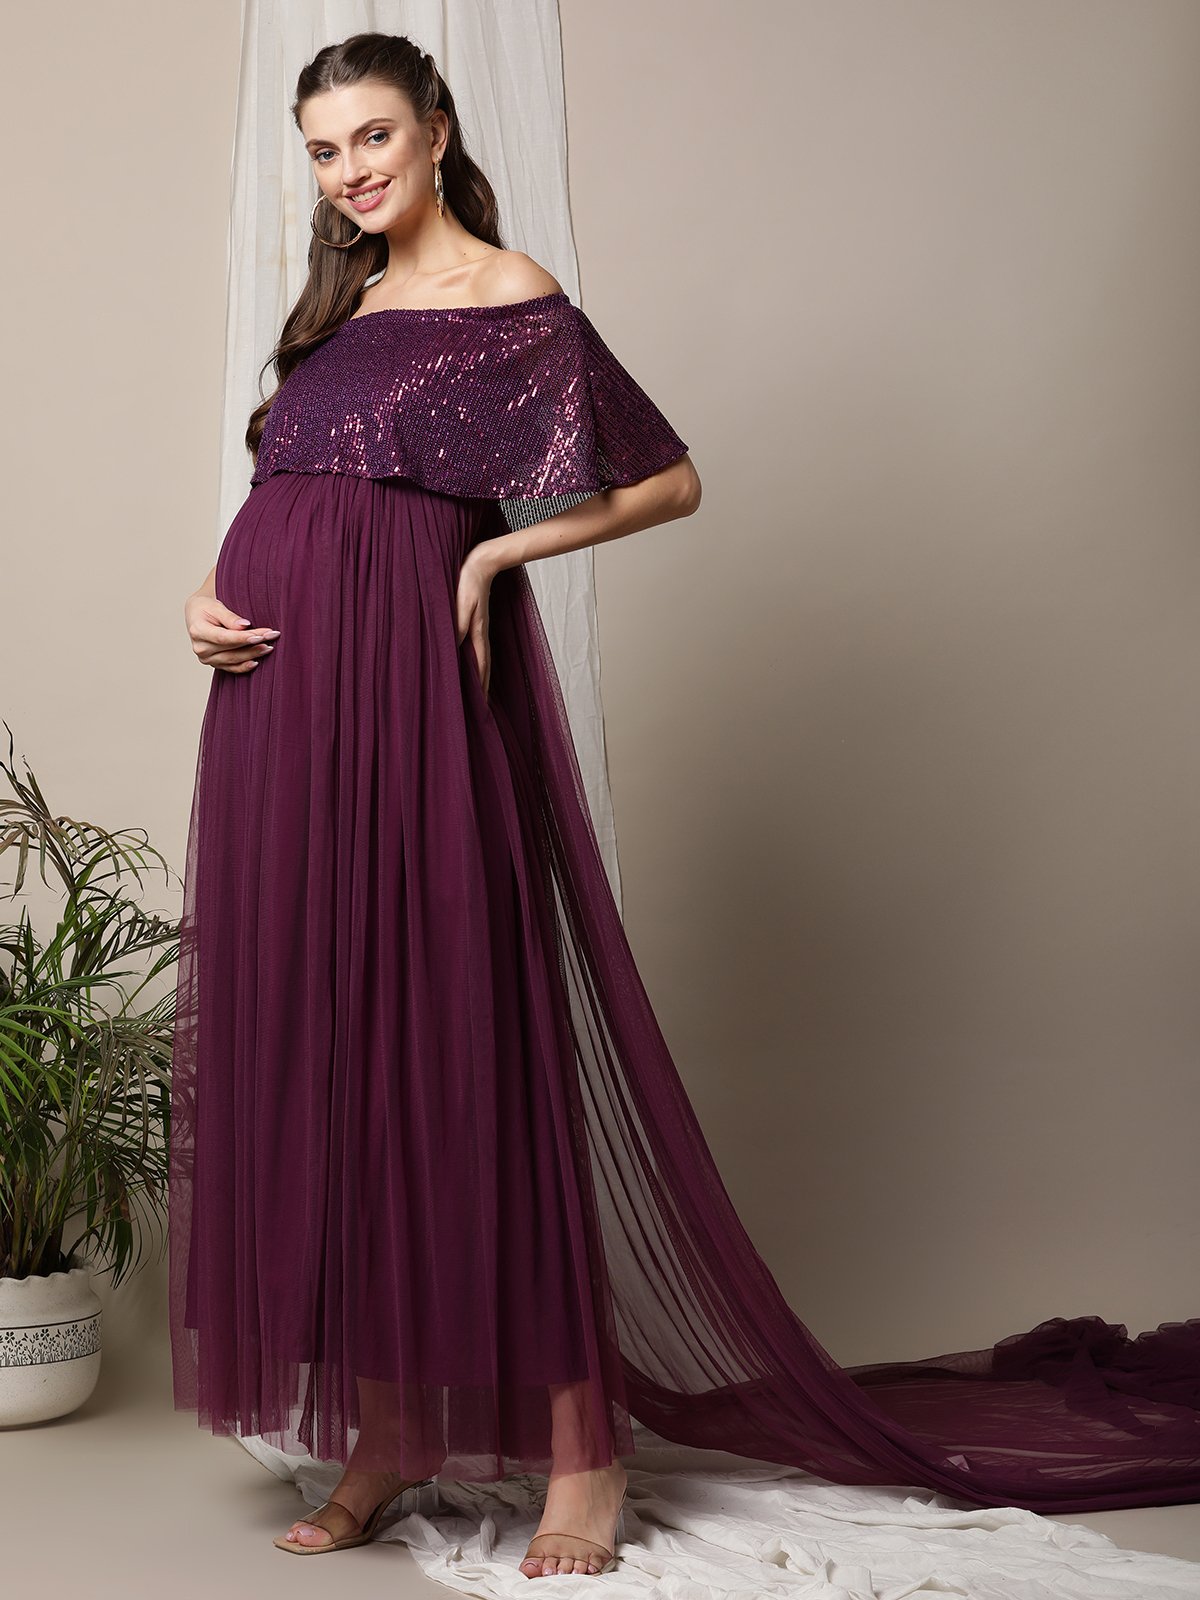 JustVH Women's Maternity Dress for photography Off Shoulder Split Front  Chiffon Gown Maxi Pregnancy Dresses for Photoshoot - Walmart.com